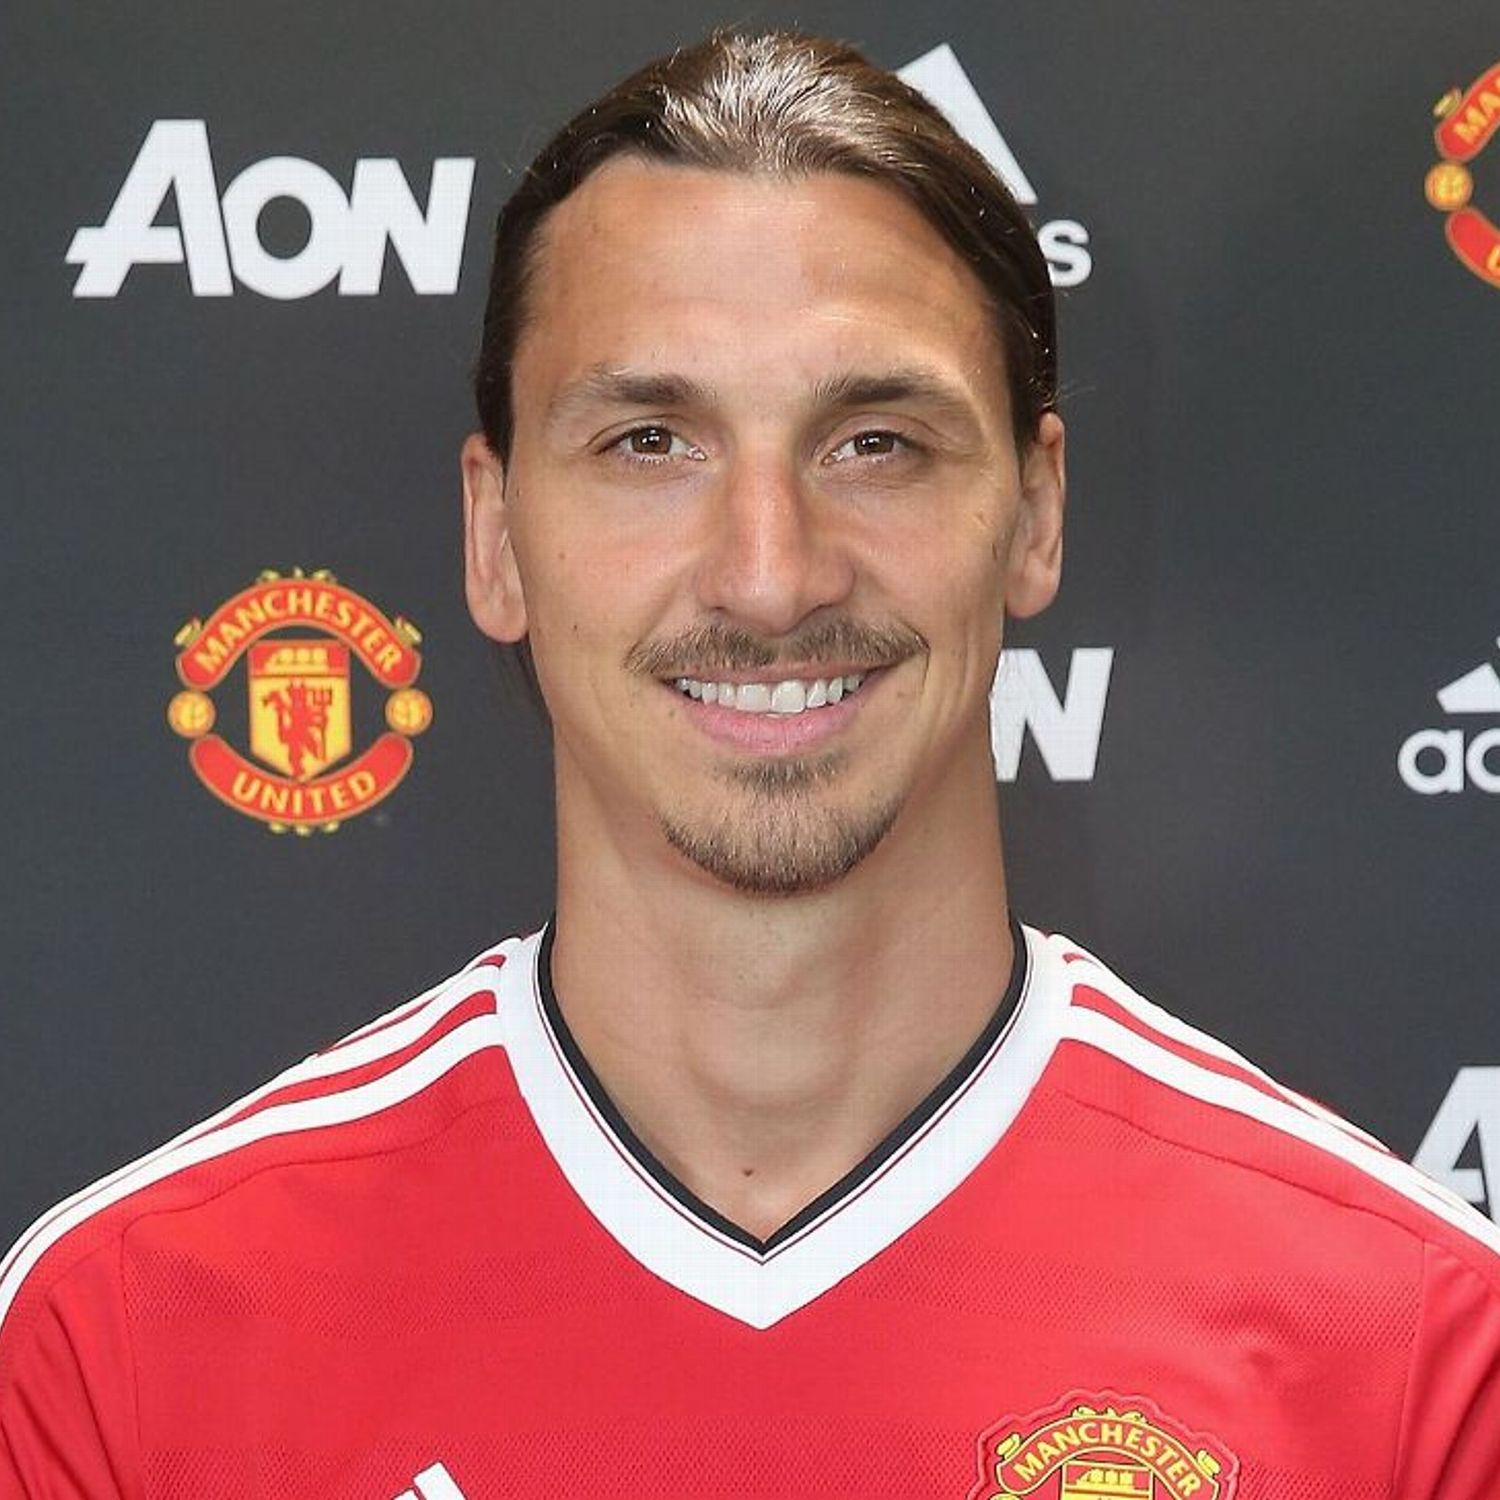 Manchester United confirm Zlatan Ibrahimovic arrival on a free transfer - ESPN FC